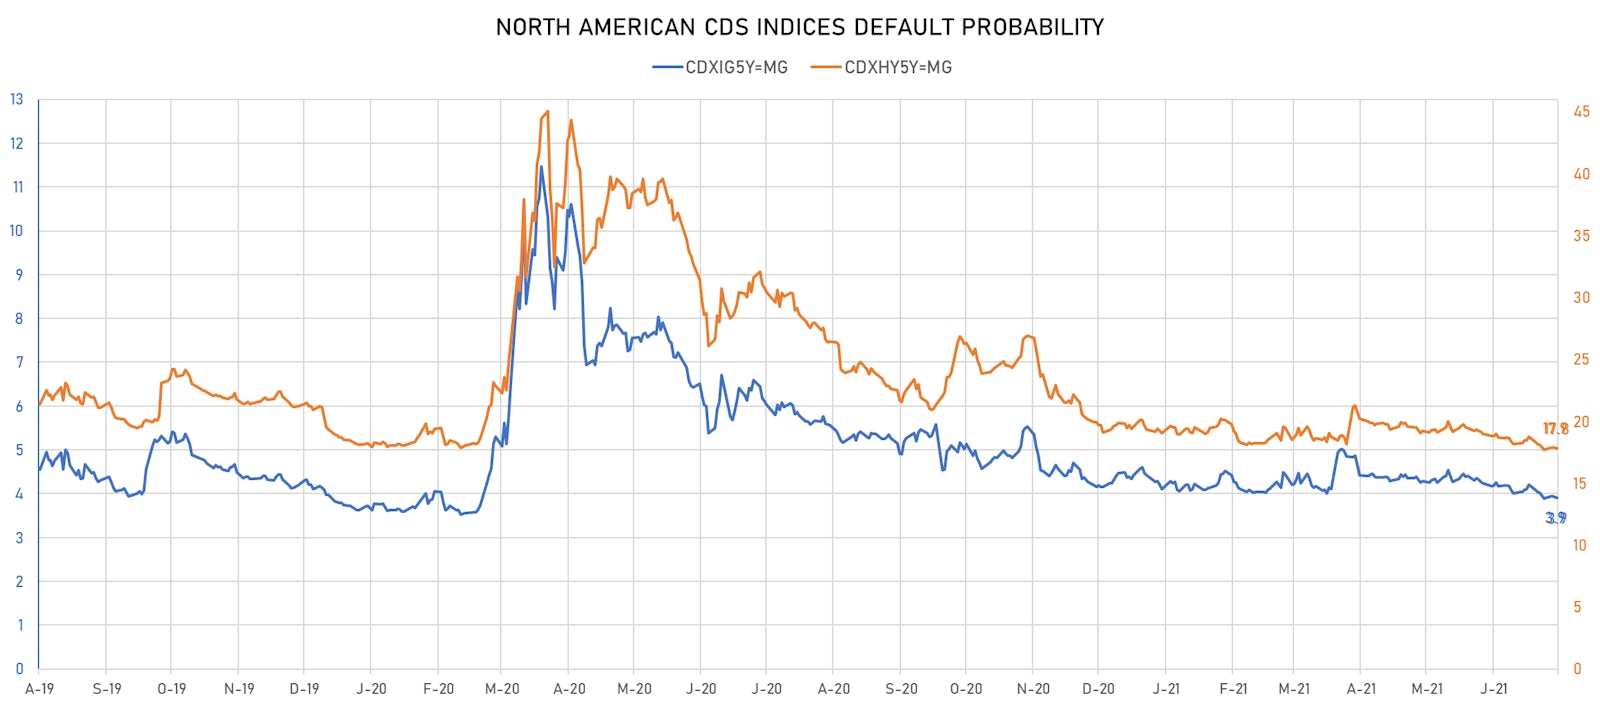 CDX NA Indices Implied Default Probability | Sources: ϕpost, Refinitiv data